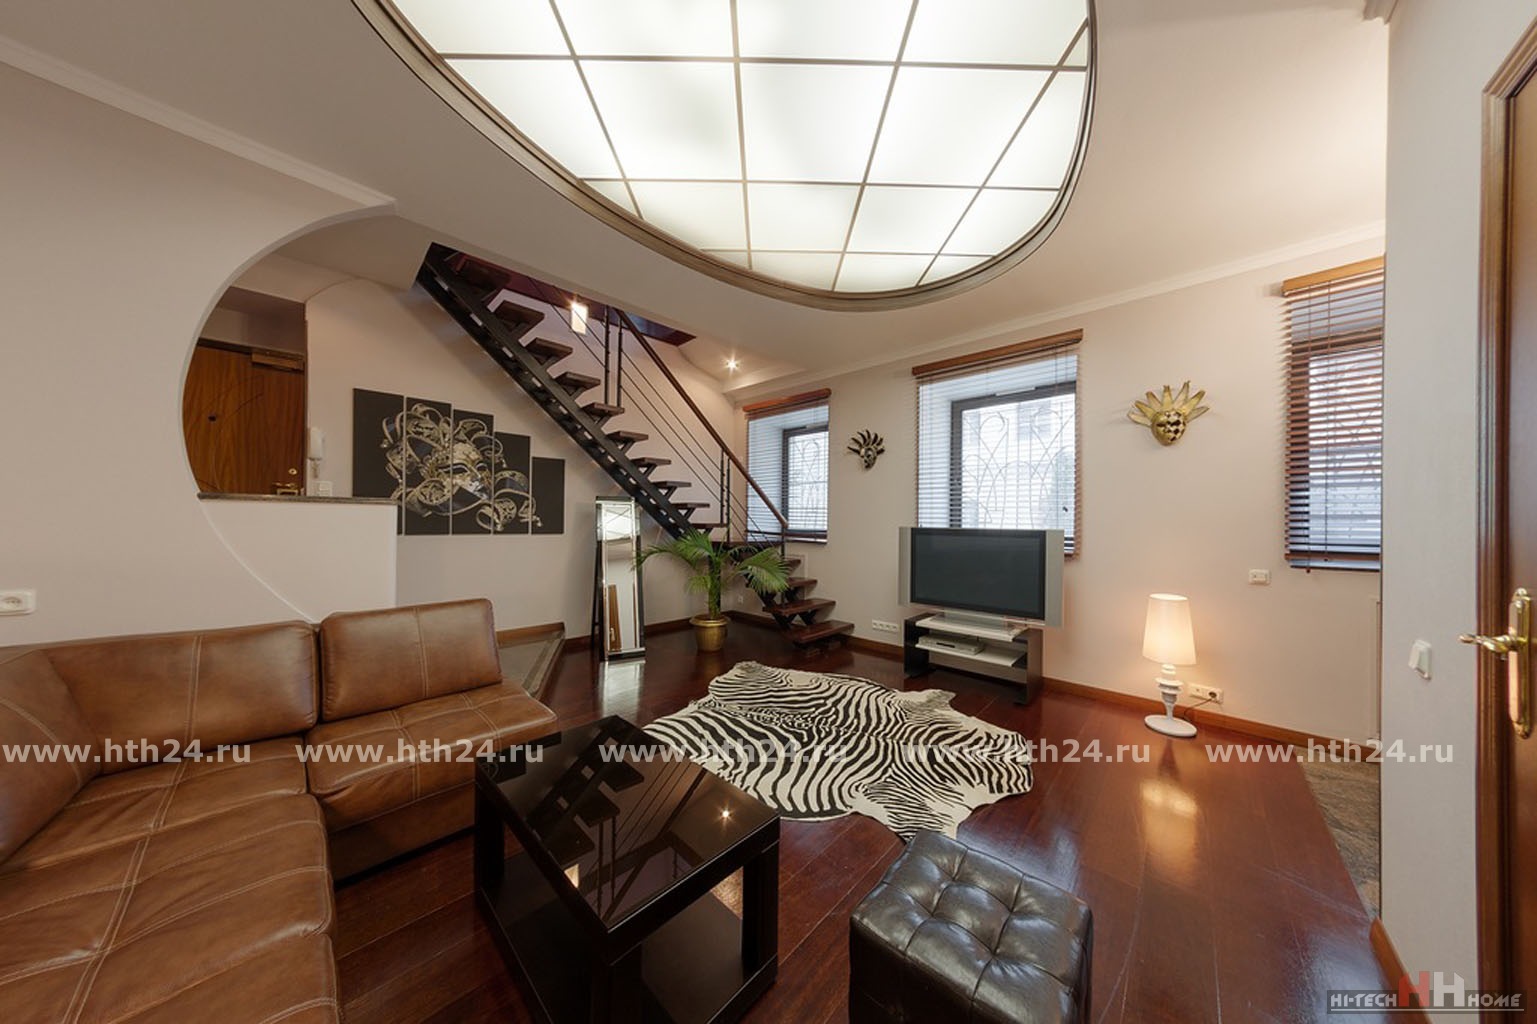 Two-level apartment for by day rent in SPb at Italyanskaya street 29